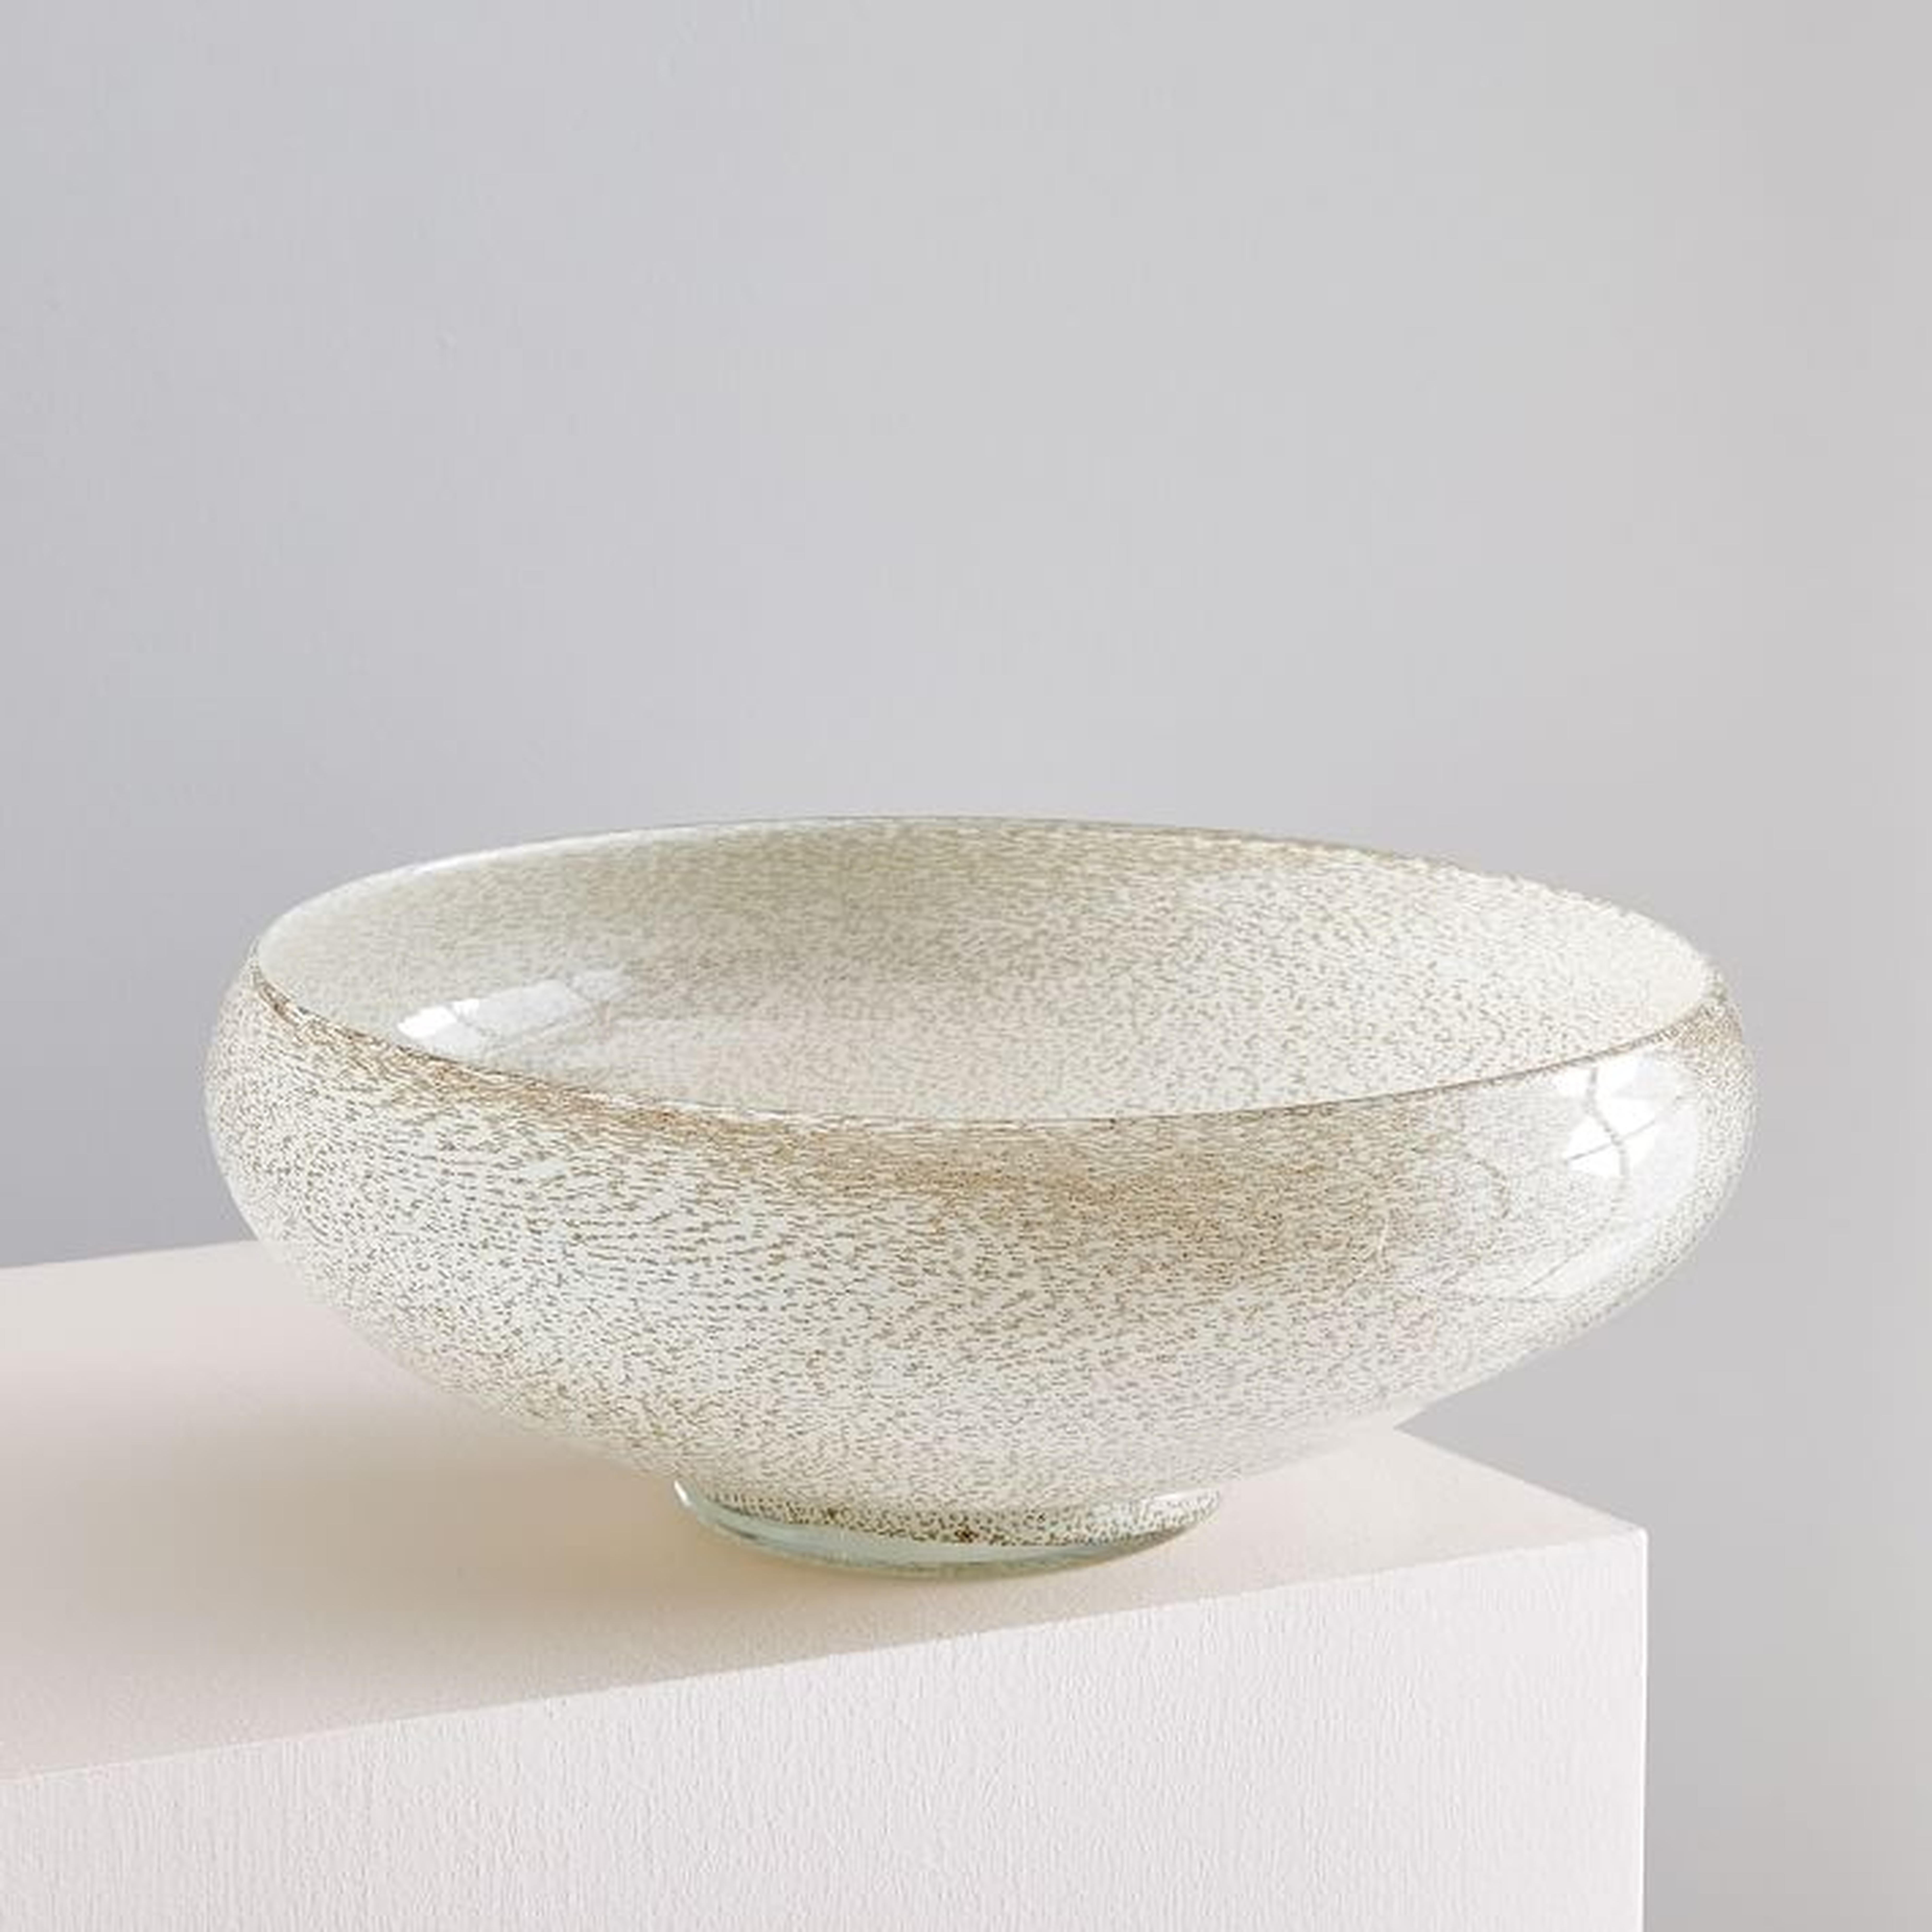 Jade Colored Glass Centerpiece Bowl - Crate and Barrel